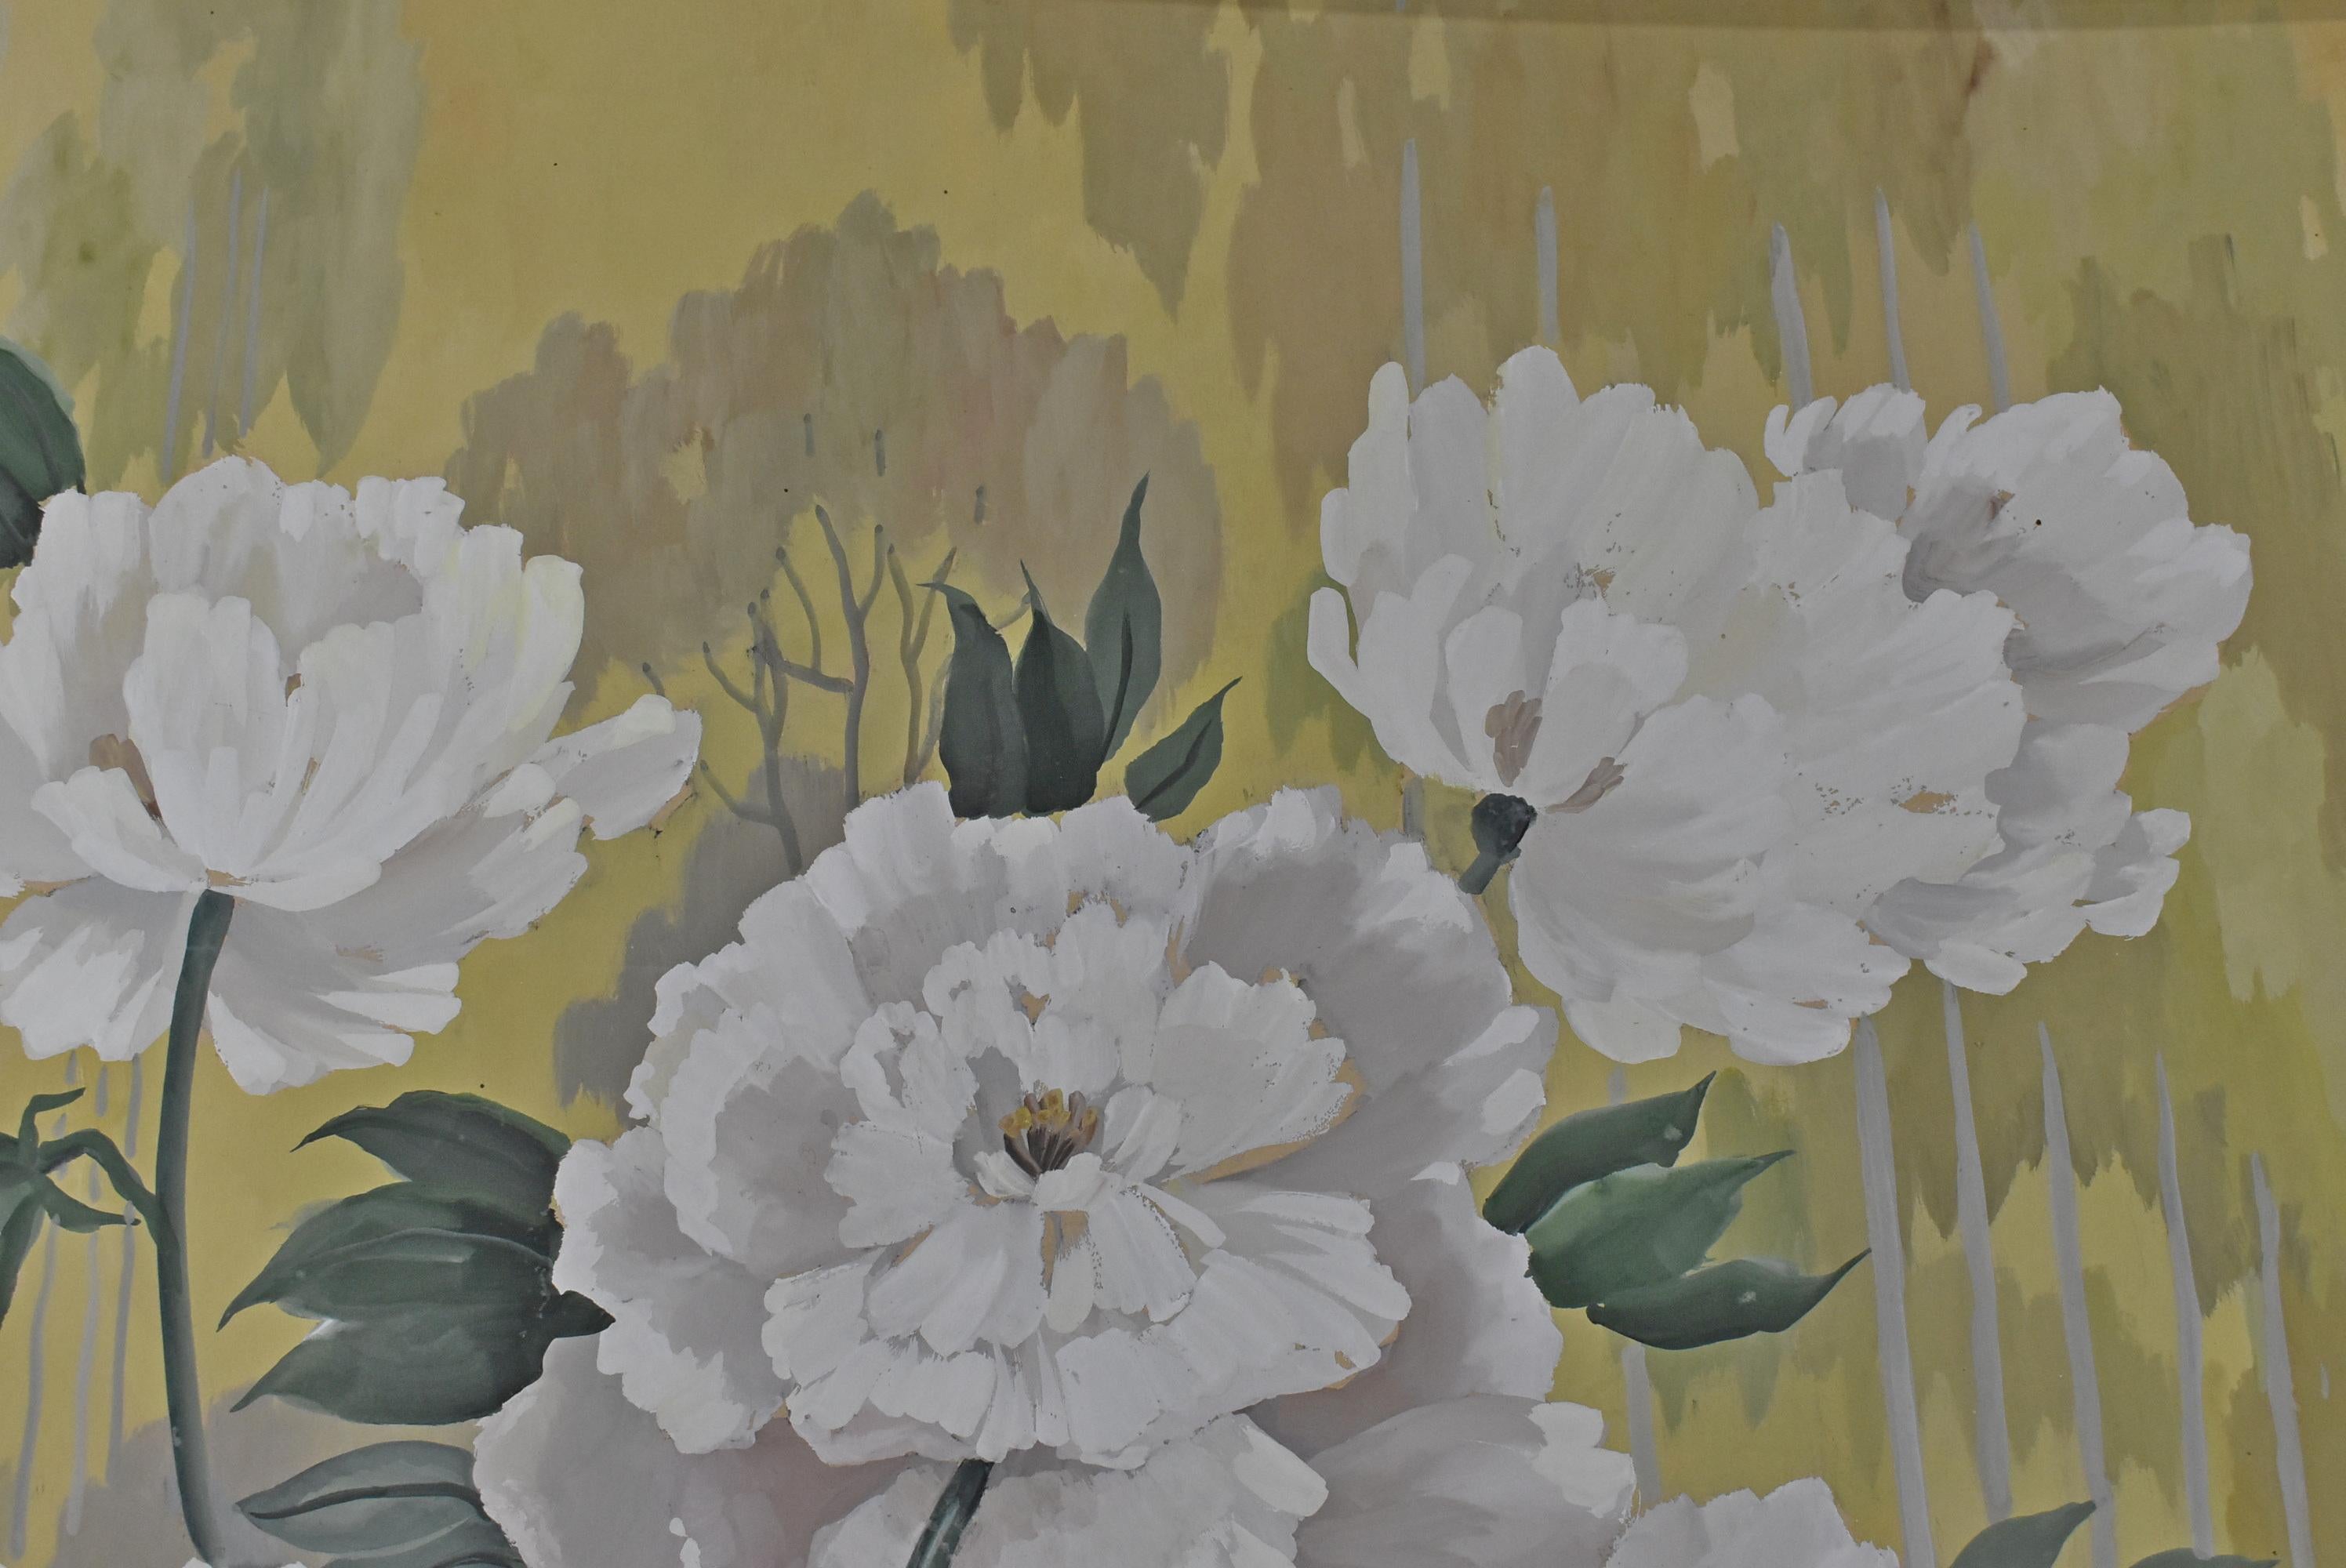 20th Century Art Deco Era Still Life by Kupur of White Peonies and Gazelles For Sale